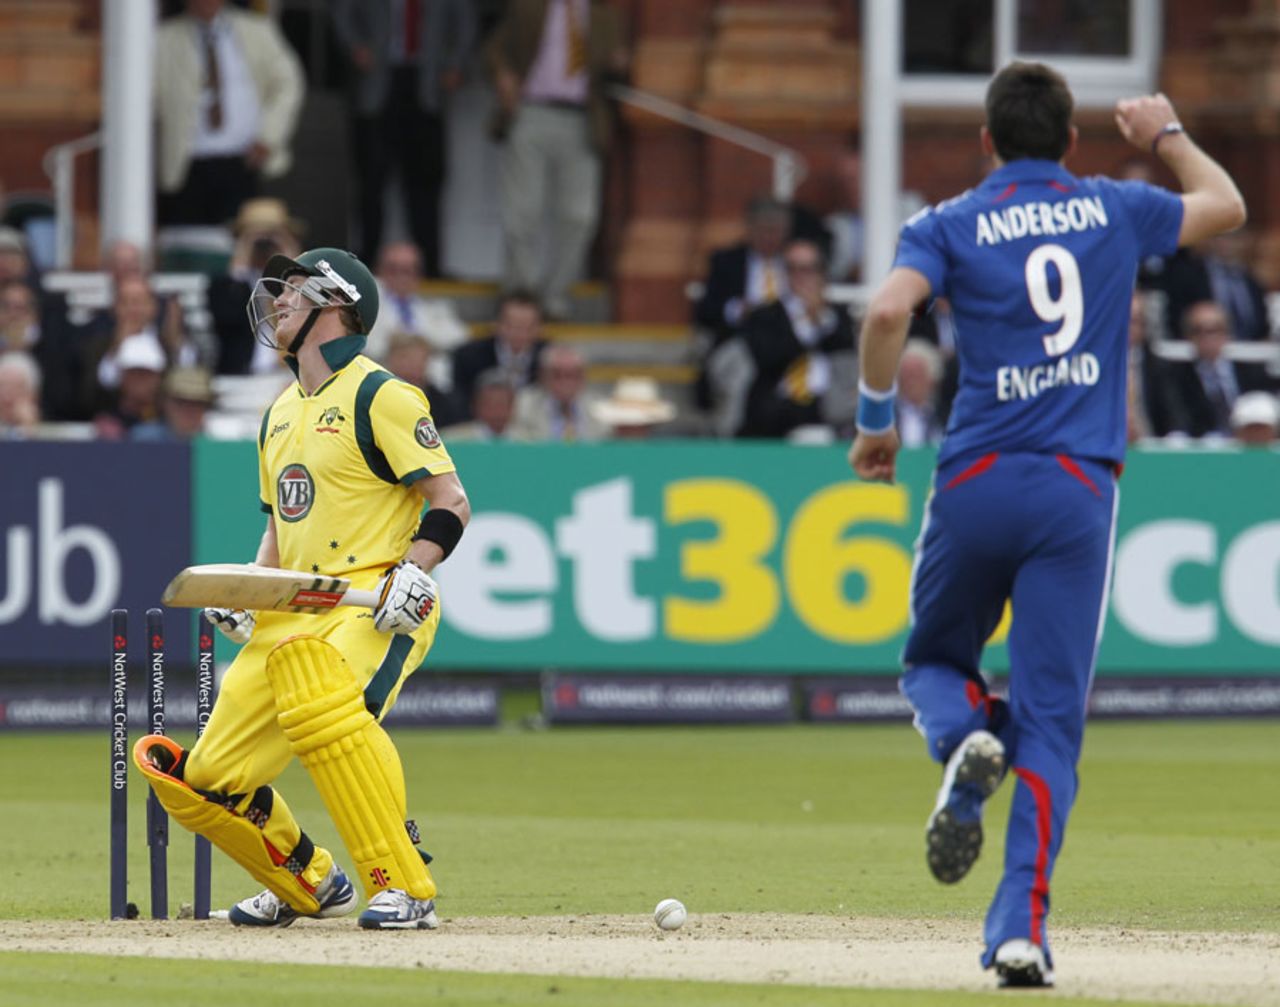 James Anderson ended a stand of 76 for the second wicket, England v Australia, 1st ODI, Lord's, June 29, 2012